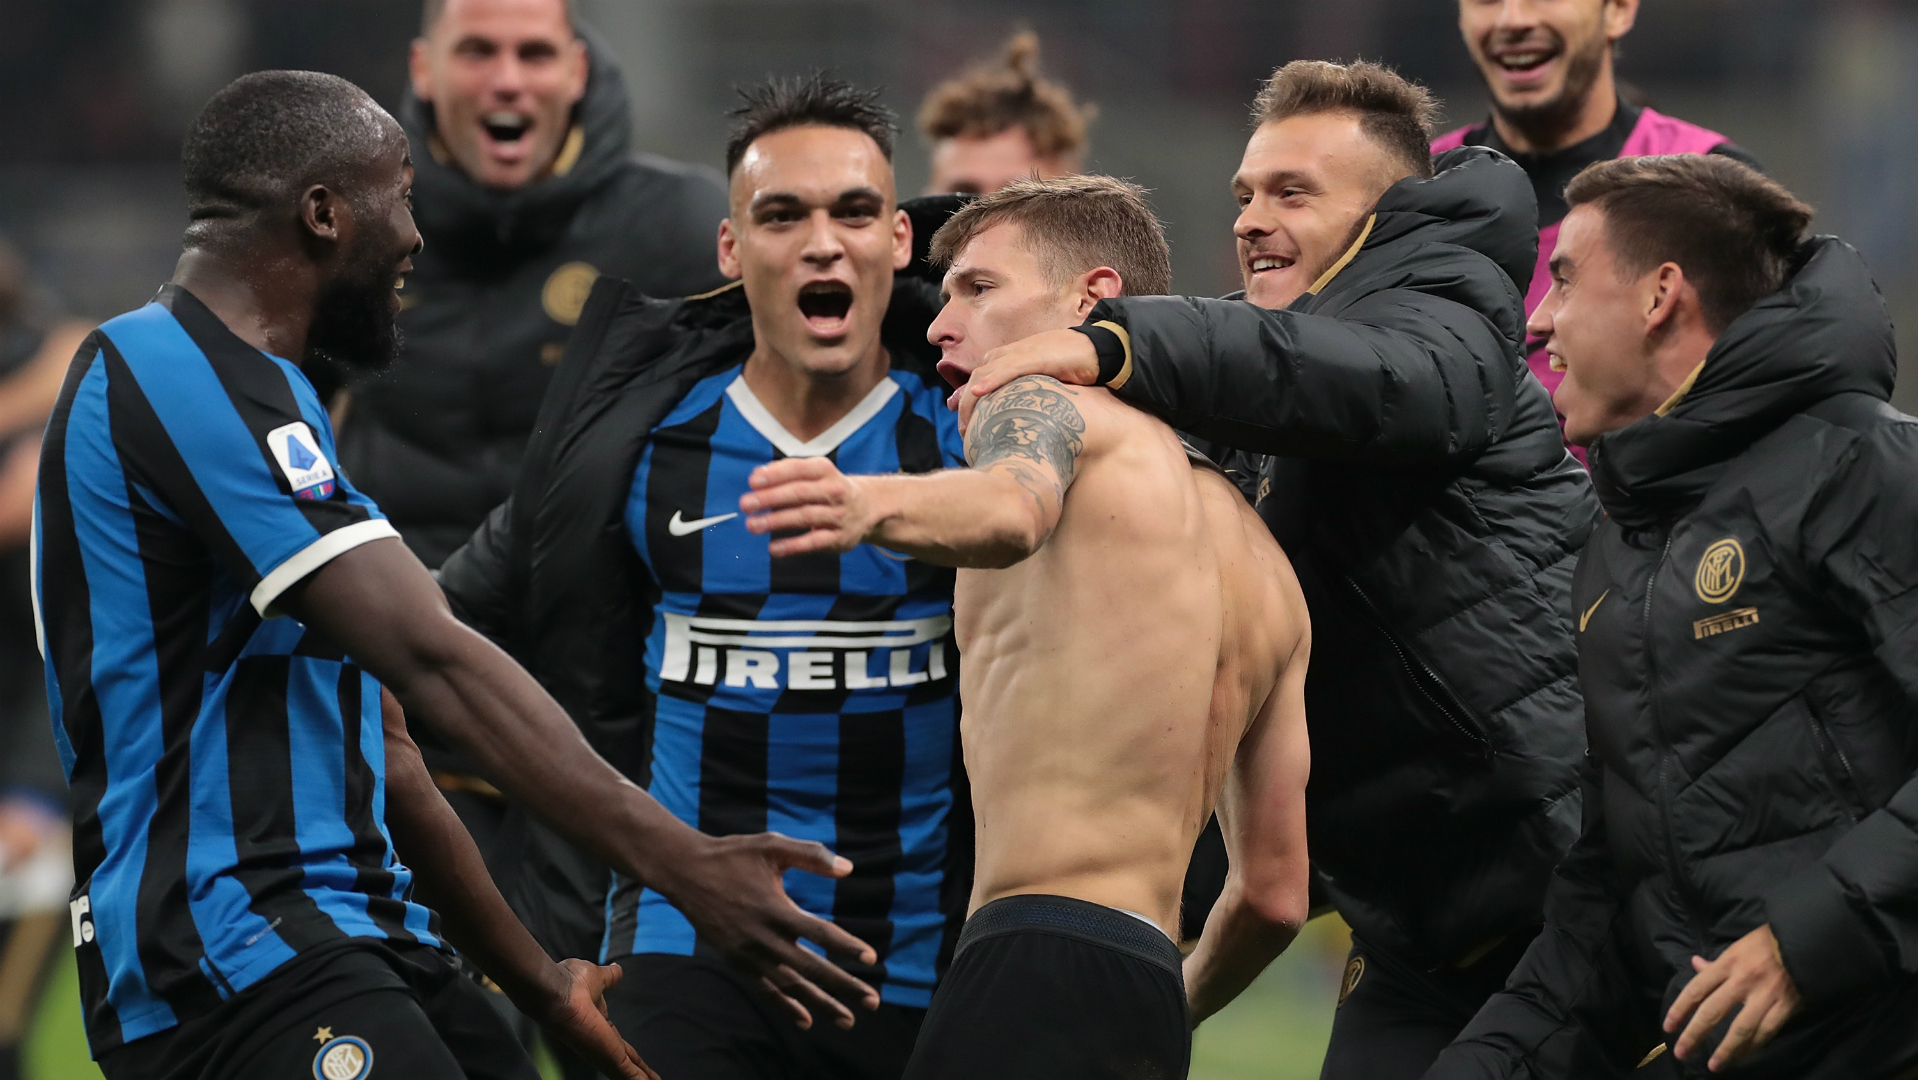 Inter recorded a comeback victory over Hellas Verona to go top of Serie A and bounce back from their collapse against Borussia Dortmund.